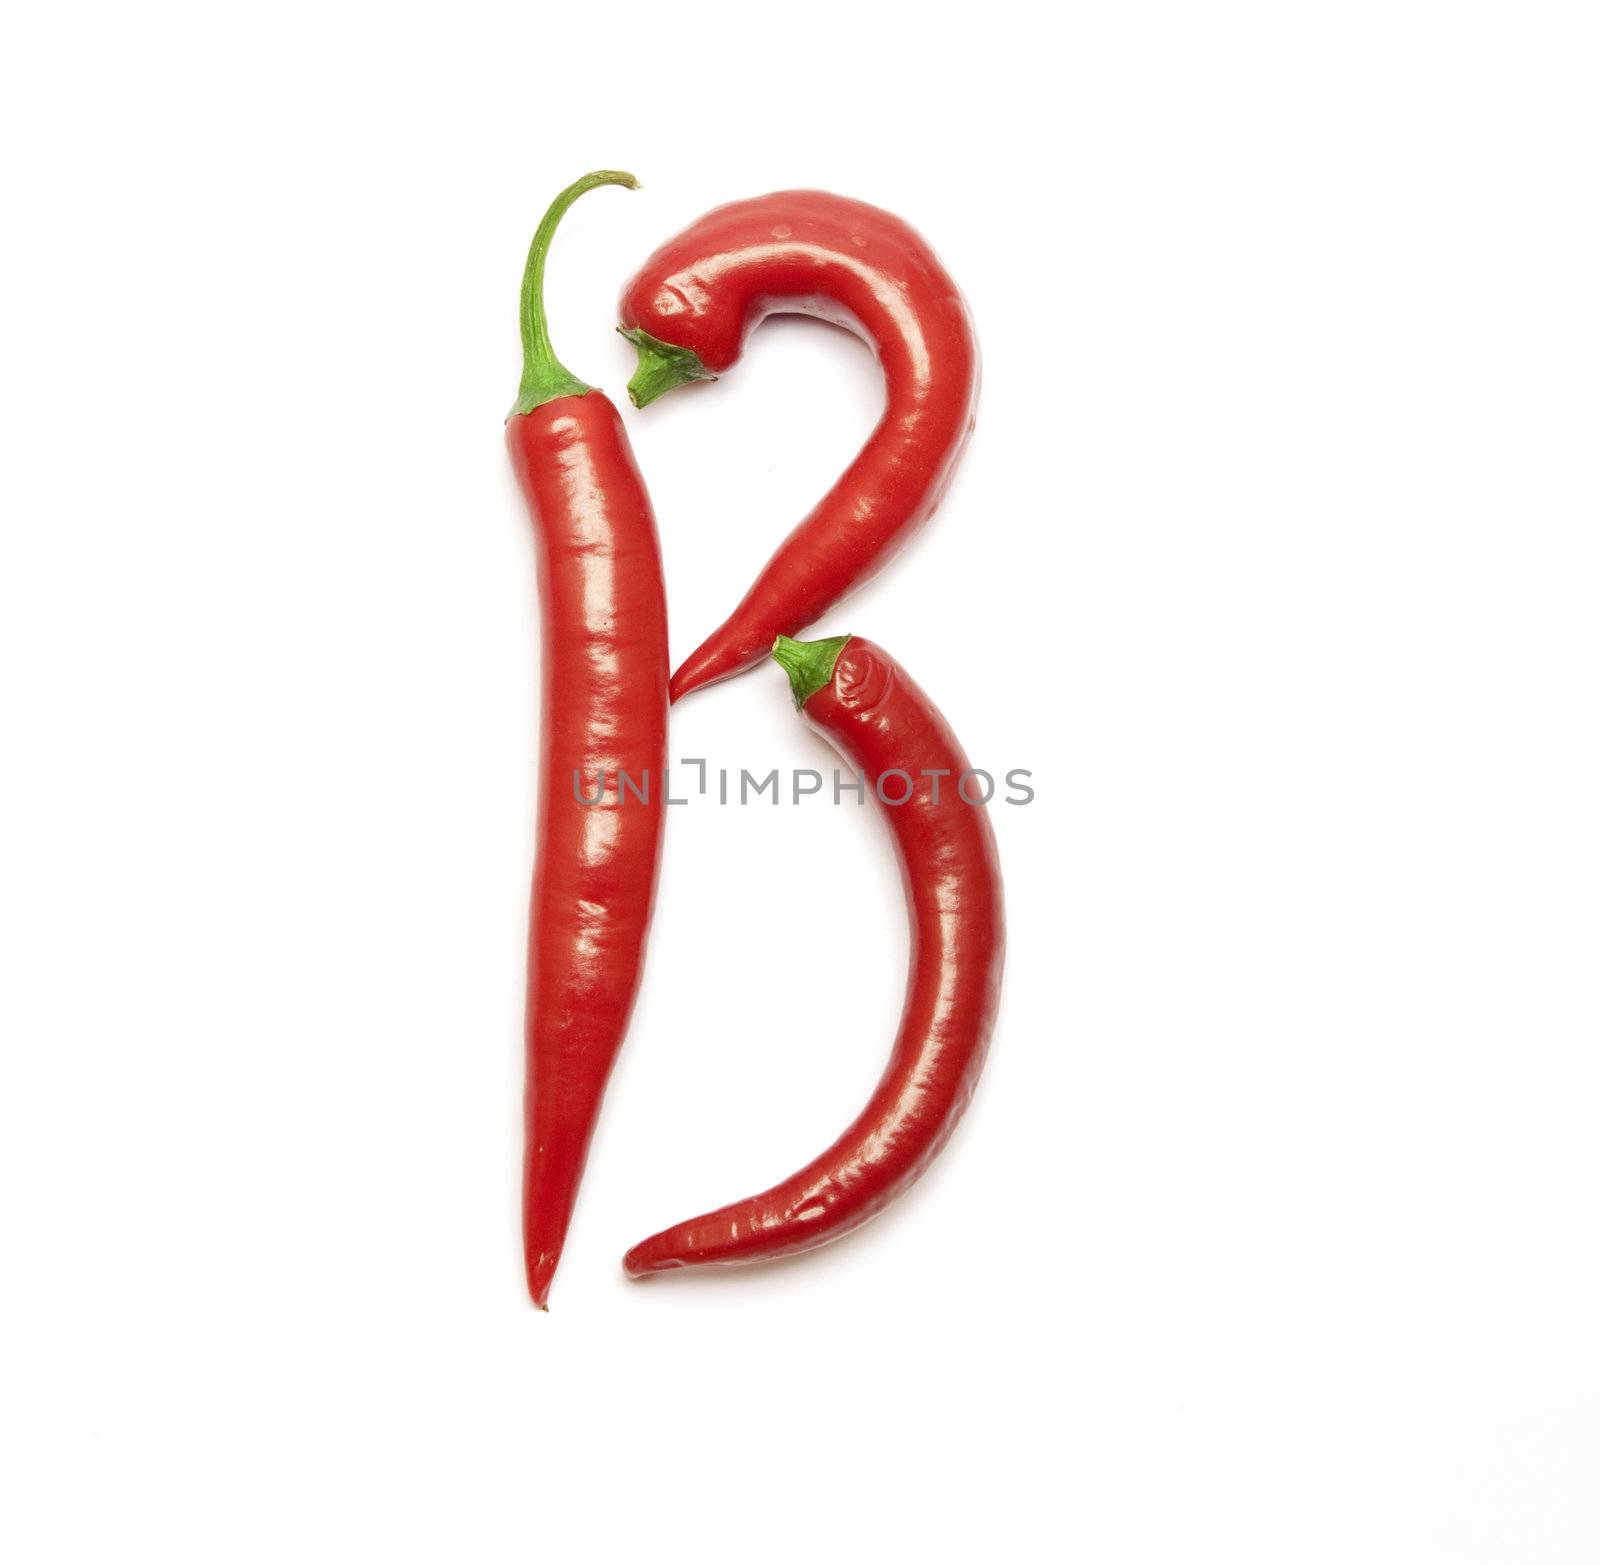 Letter made from red peppers over white backround